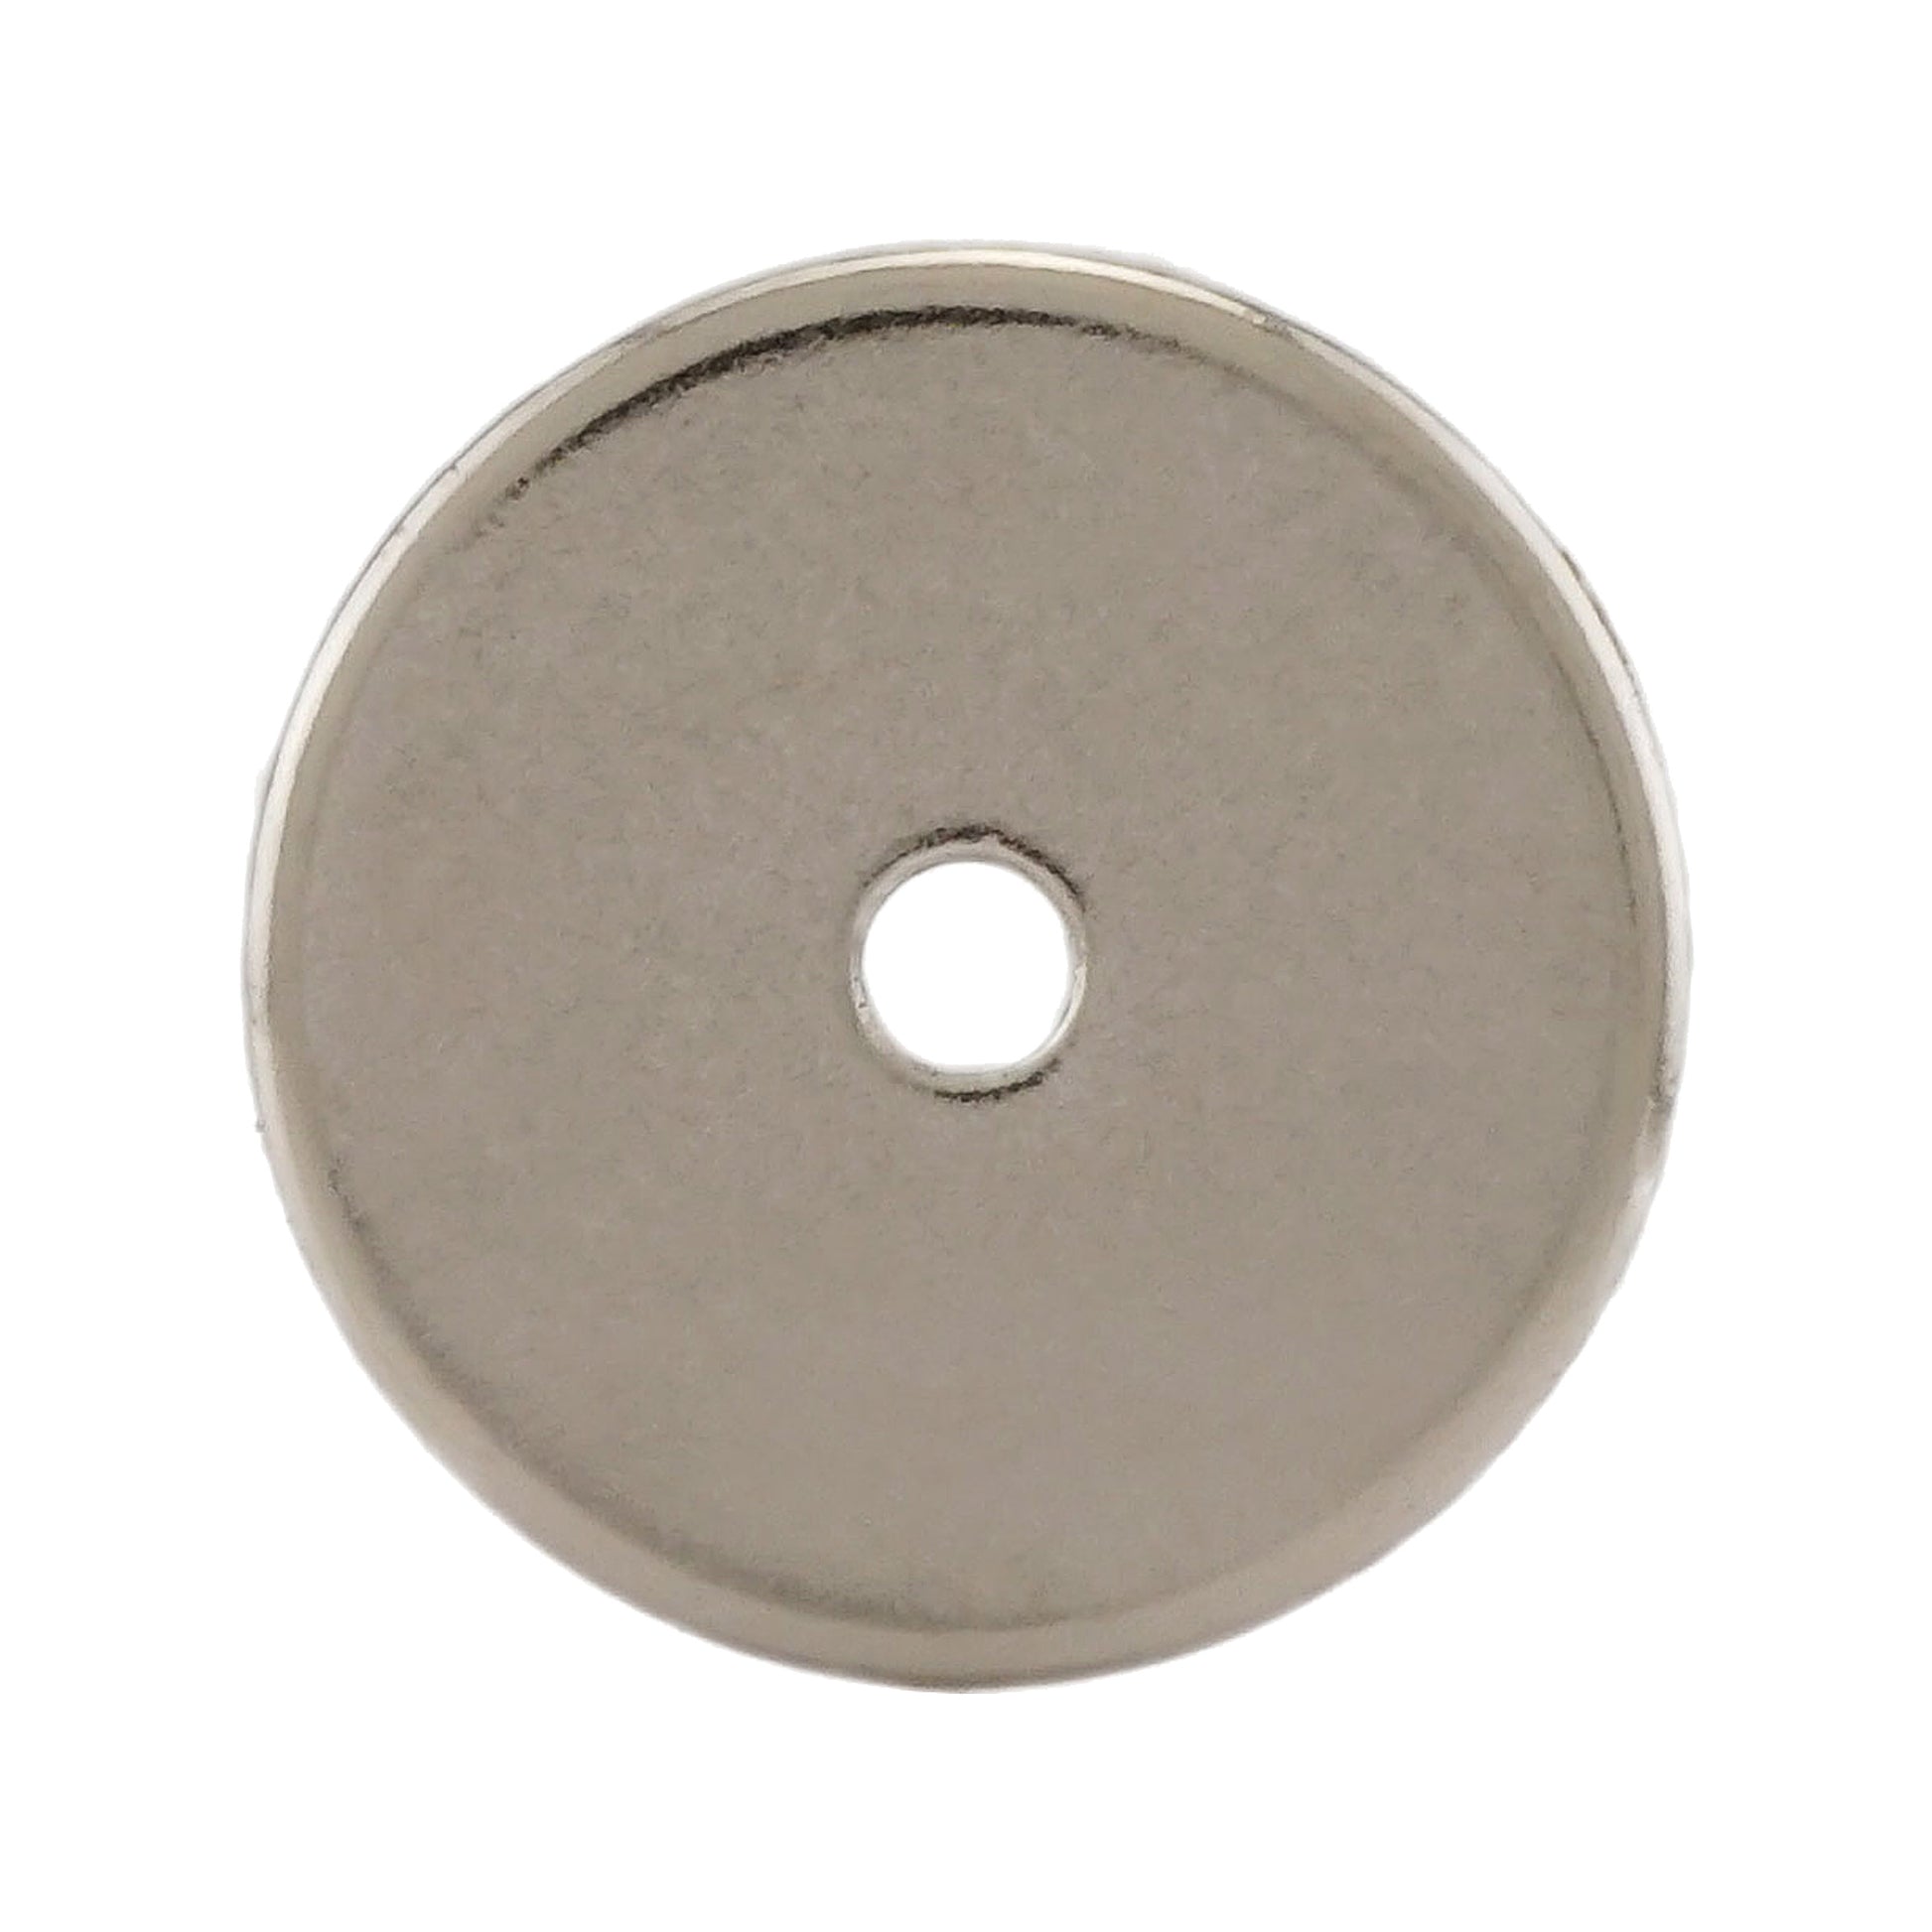 Load image into Gallery viewer, NR008704N Neodymium Ring Magnet - Top View